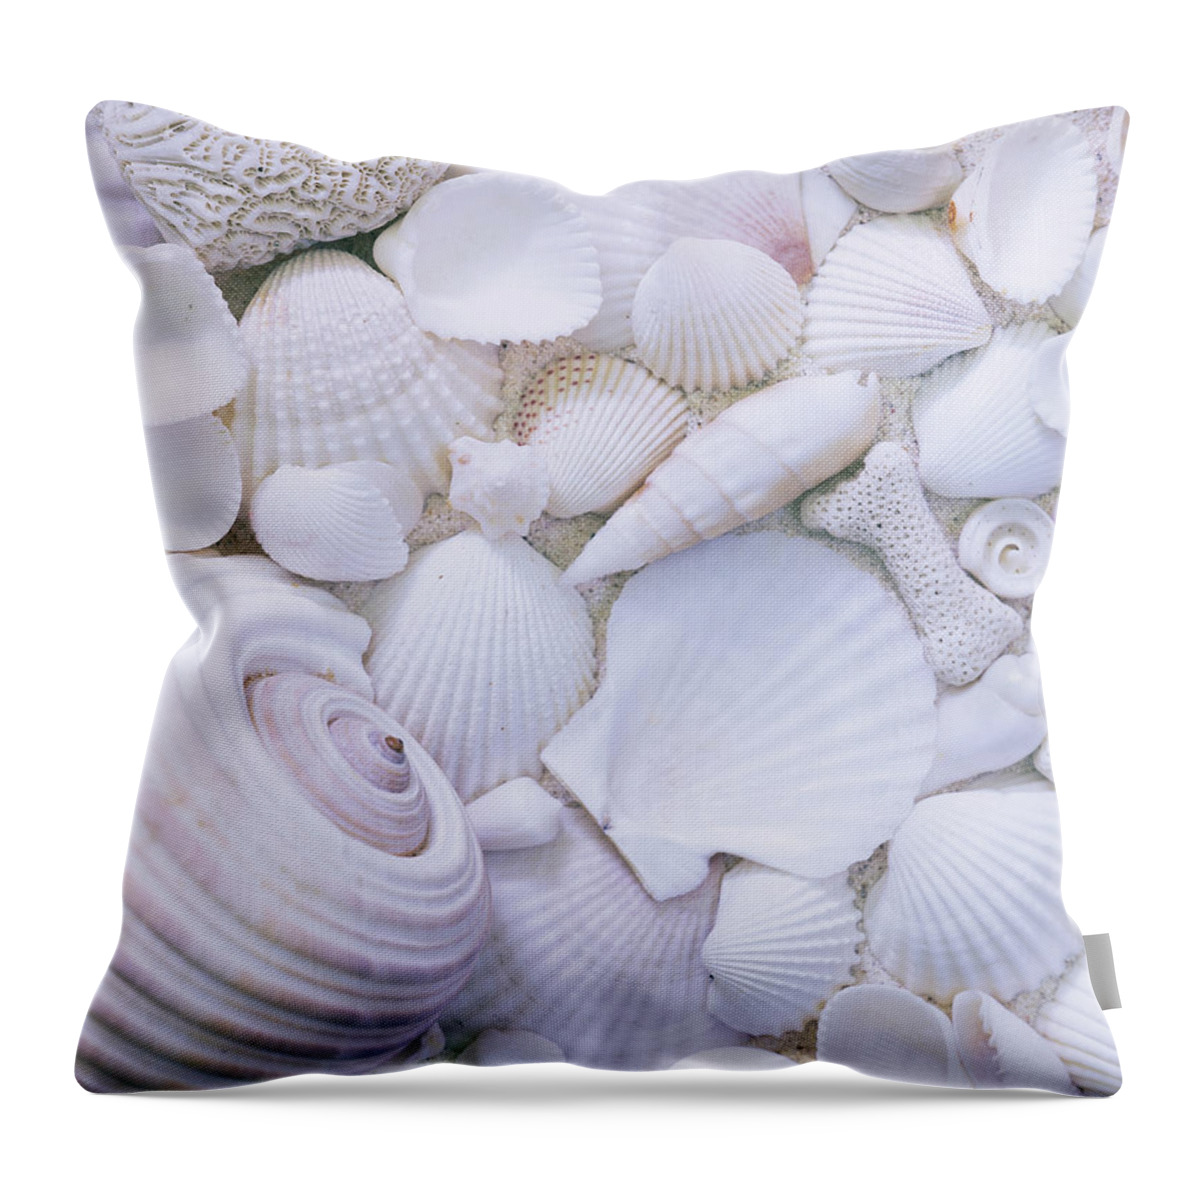 Animal Shell Throw Pillow featuring the photograph Full Frame Of Shells by Hiroshi Higuchi